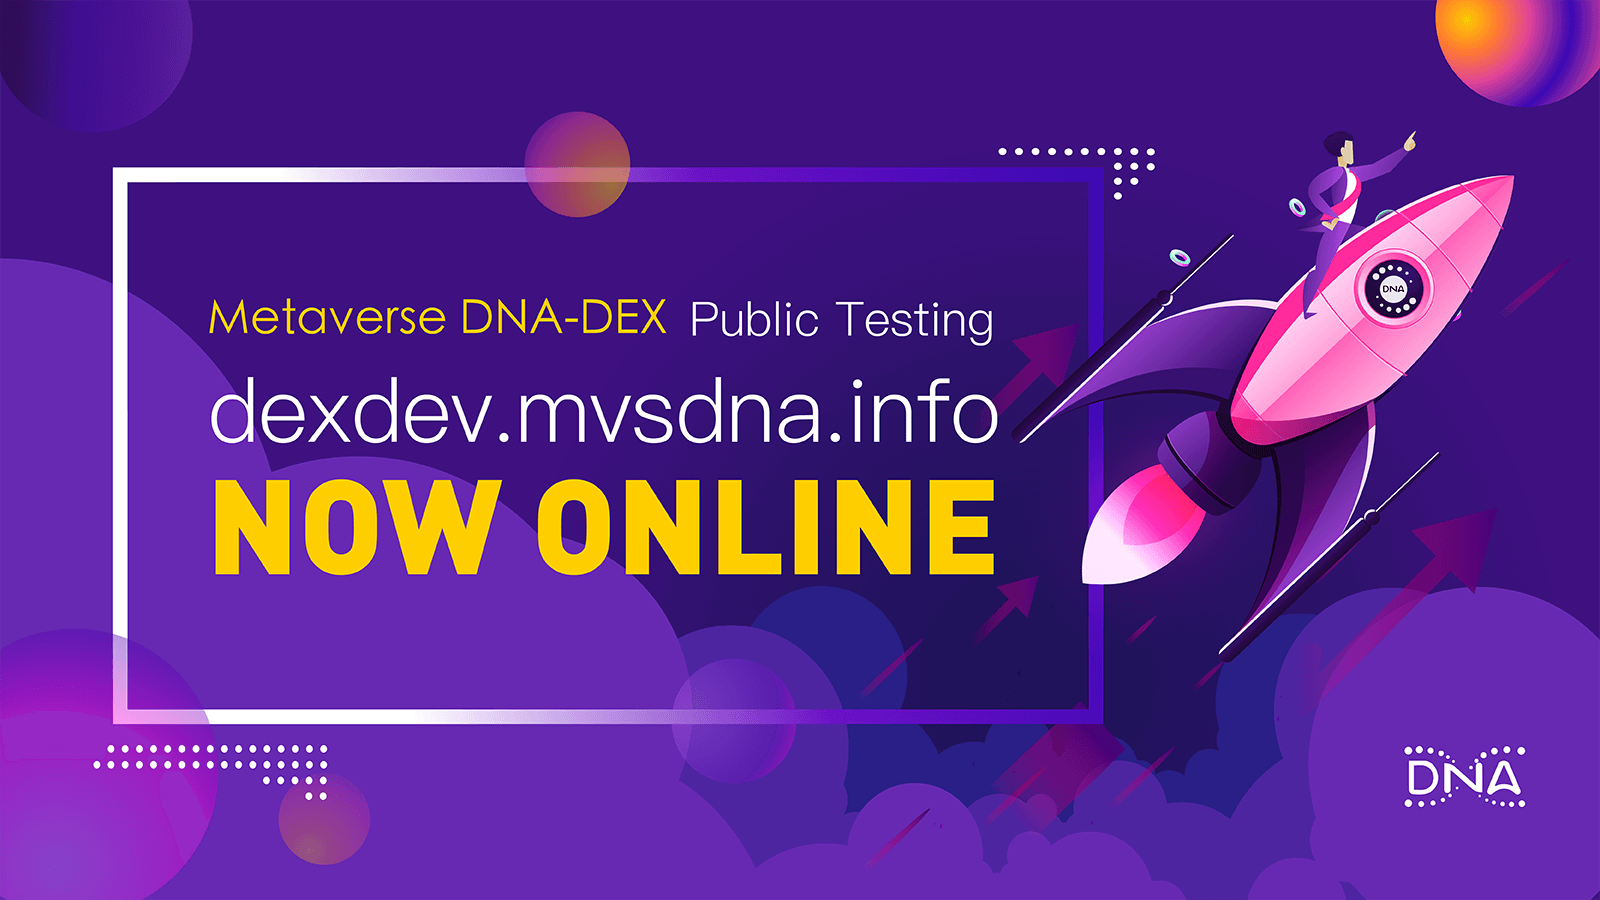 Dna holdings crypto xbt ethereum tracker